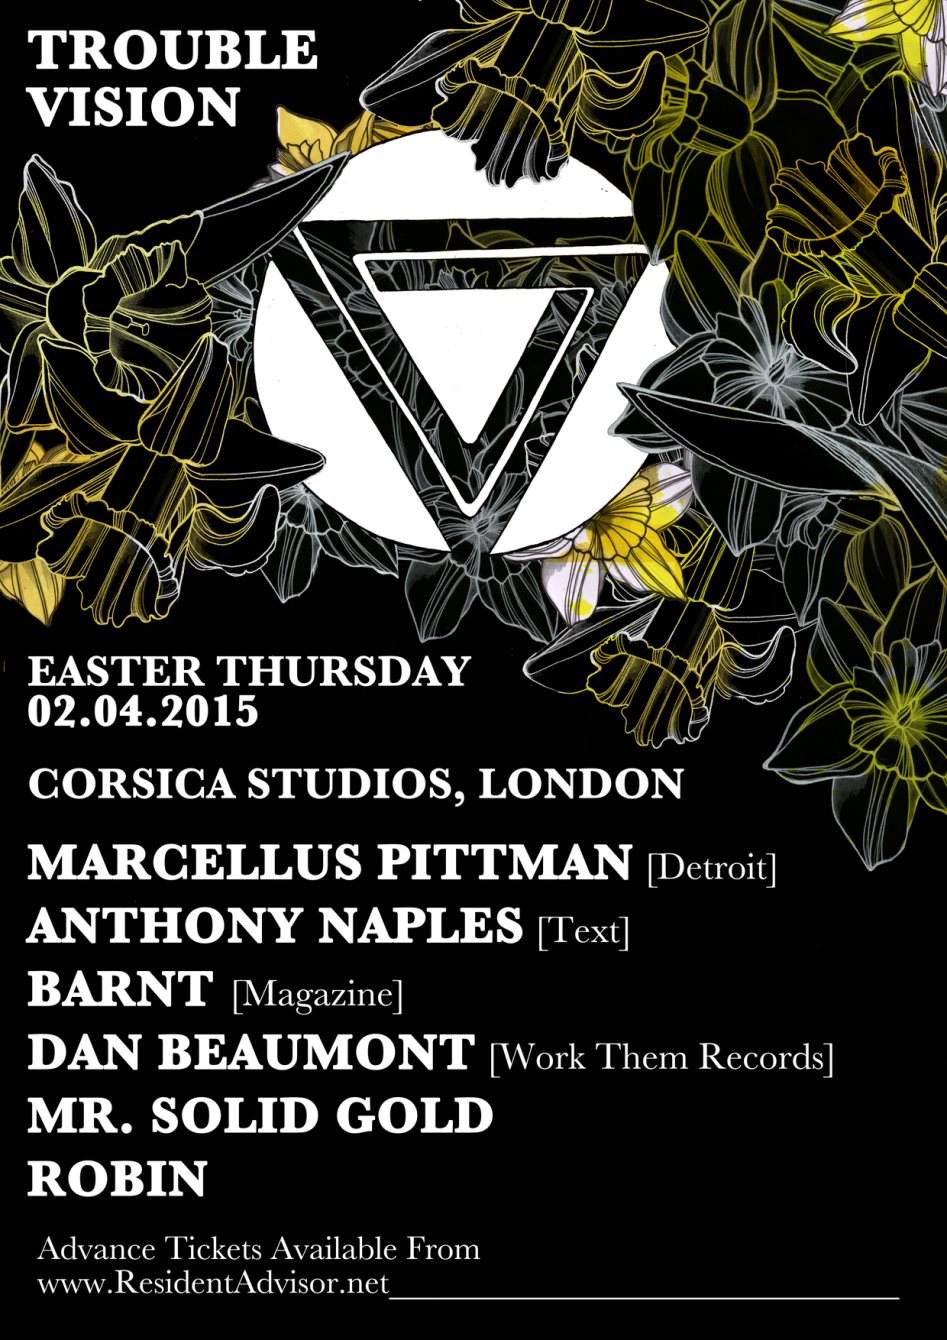 Trouble Vision 2015.3 with Marcellus Pittman, Anthony Naples, Barnt & More - Página trasera